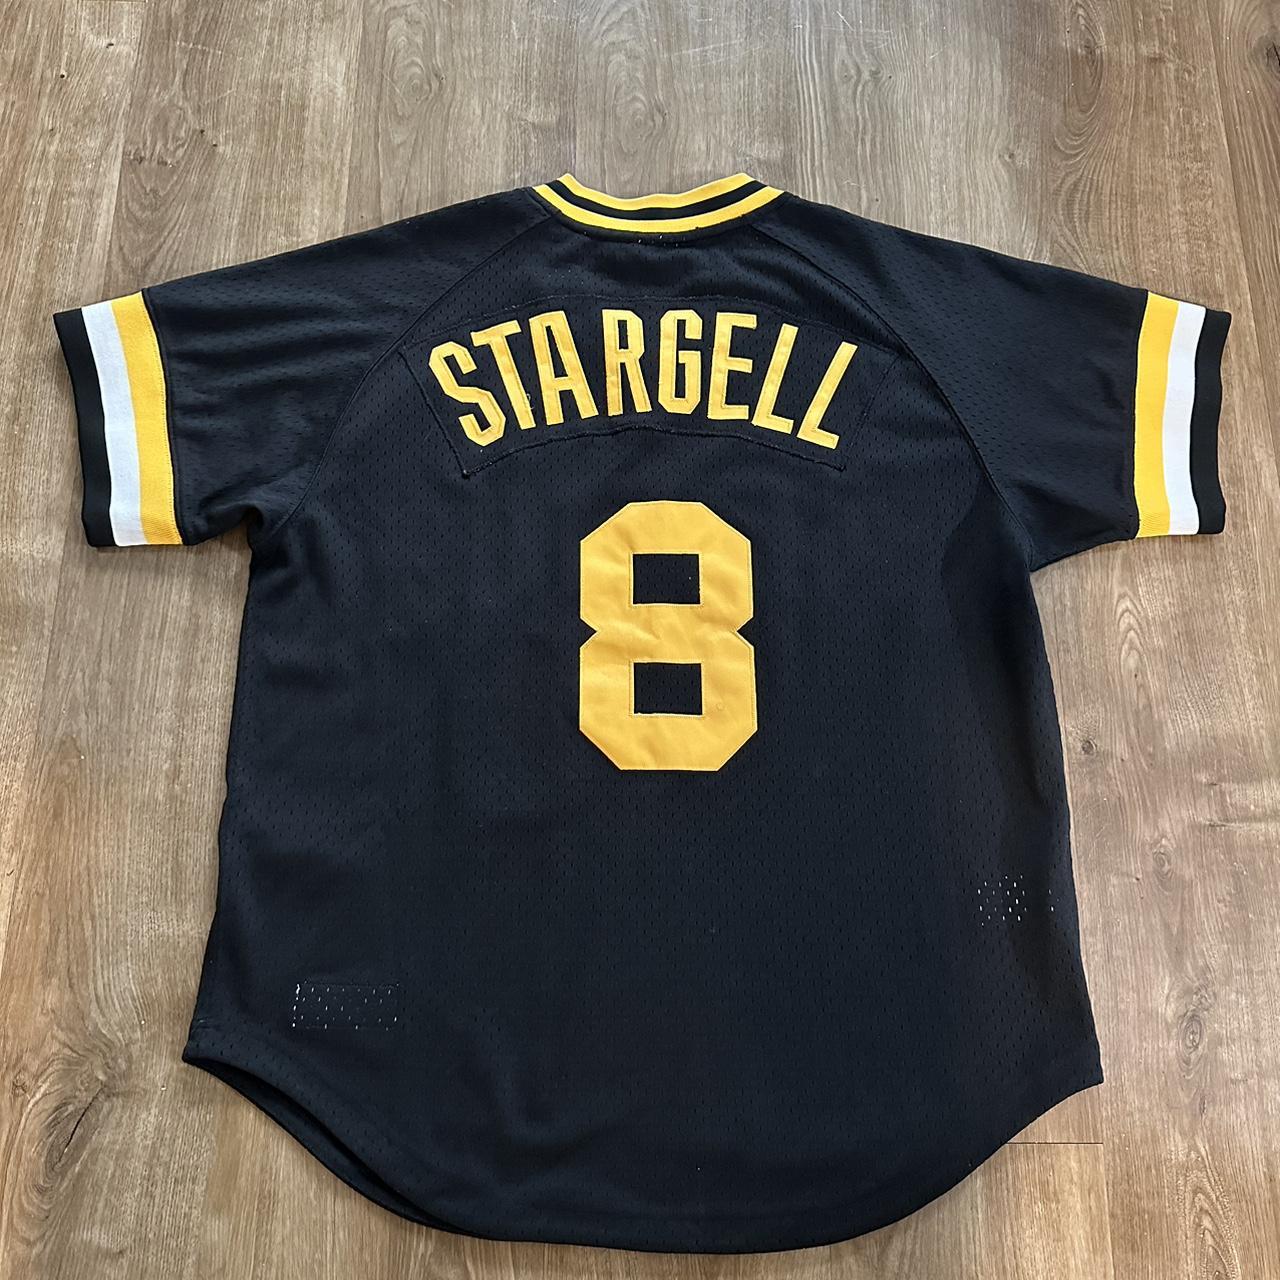 MITCHELL NESS COOPERSTOWN COLLECTION PITTSBURGH PIRATES STARGELL